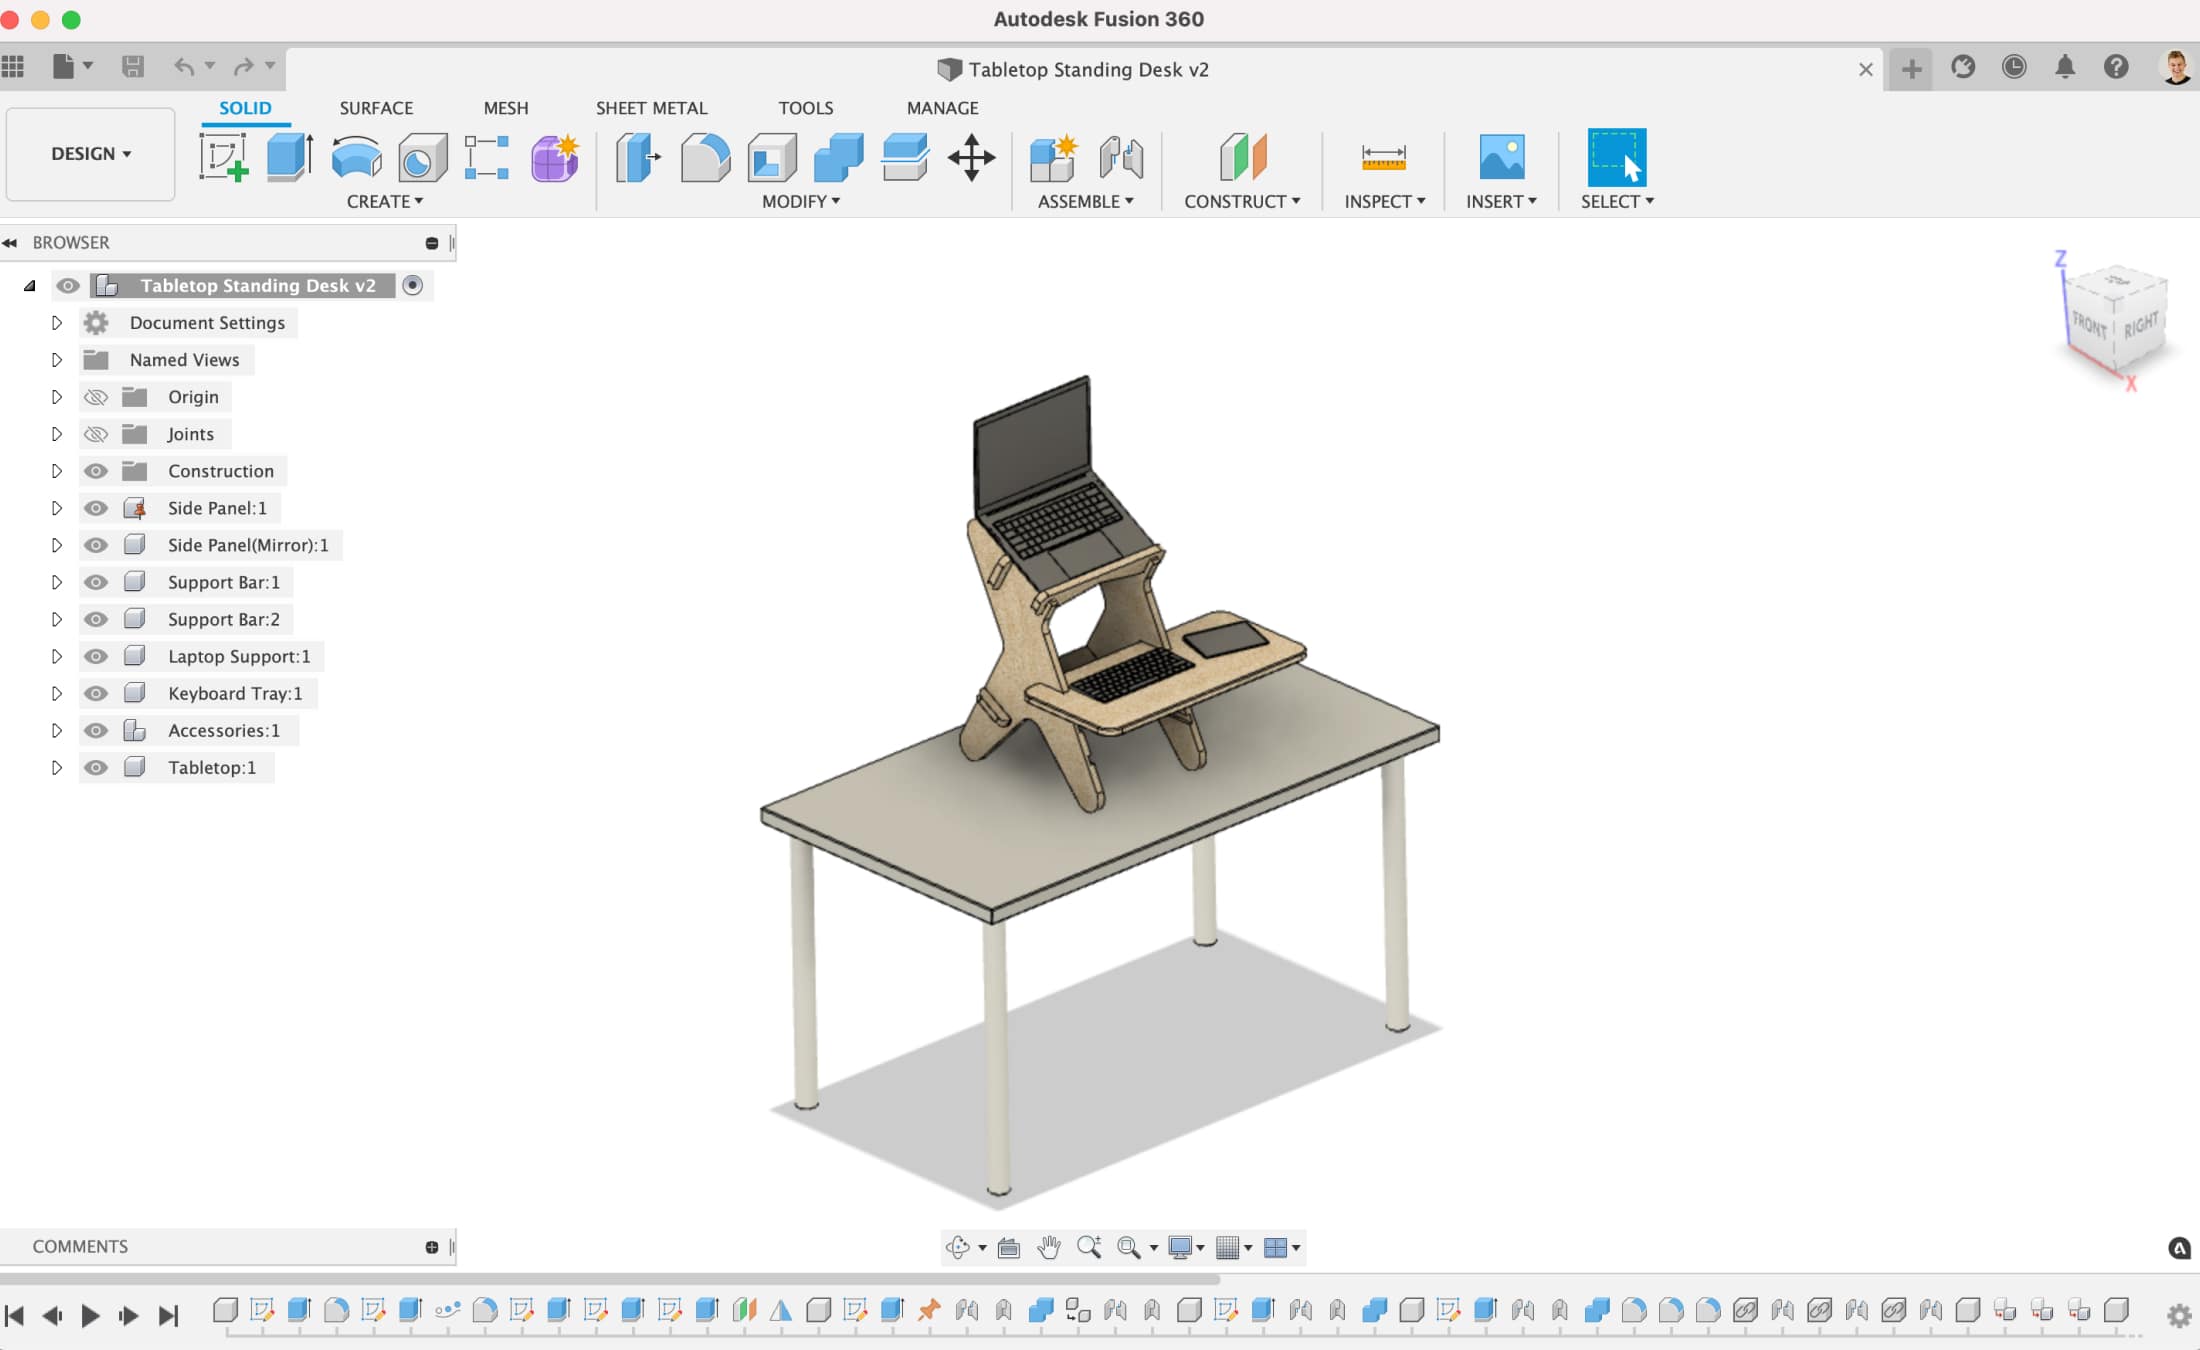 is autodesk fusion 360 free